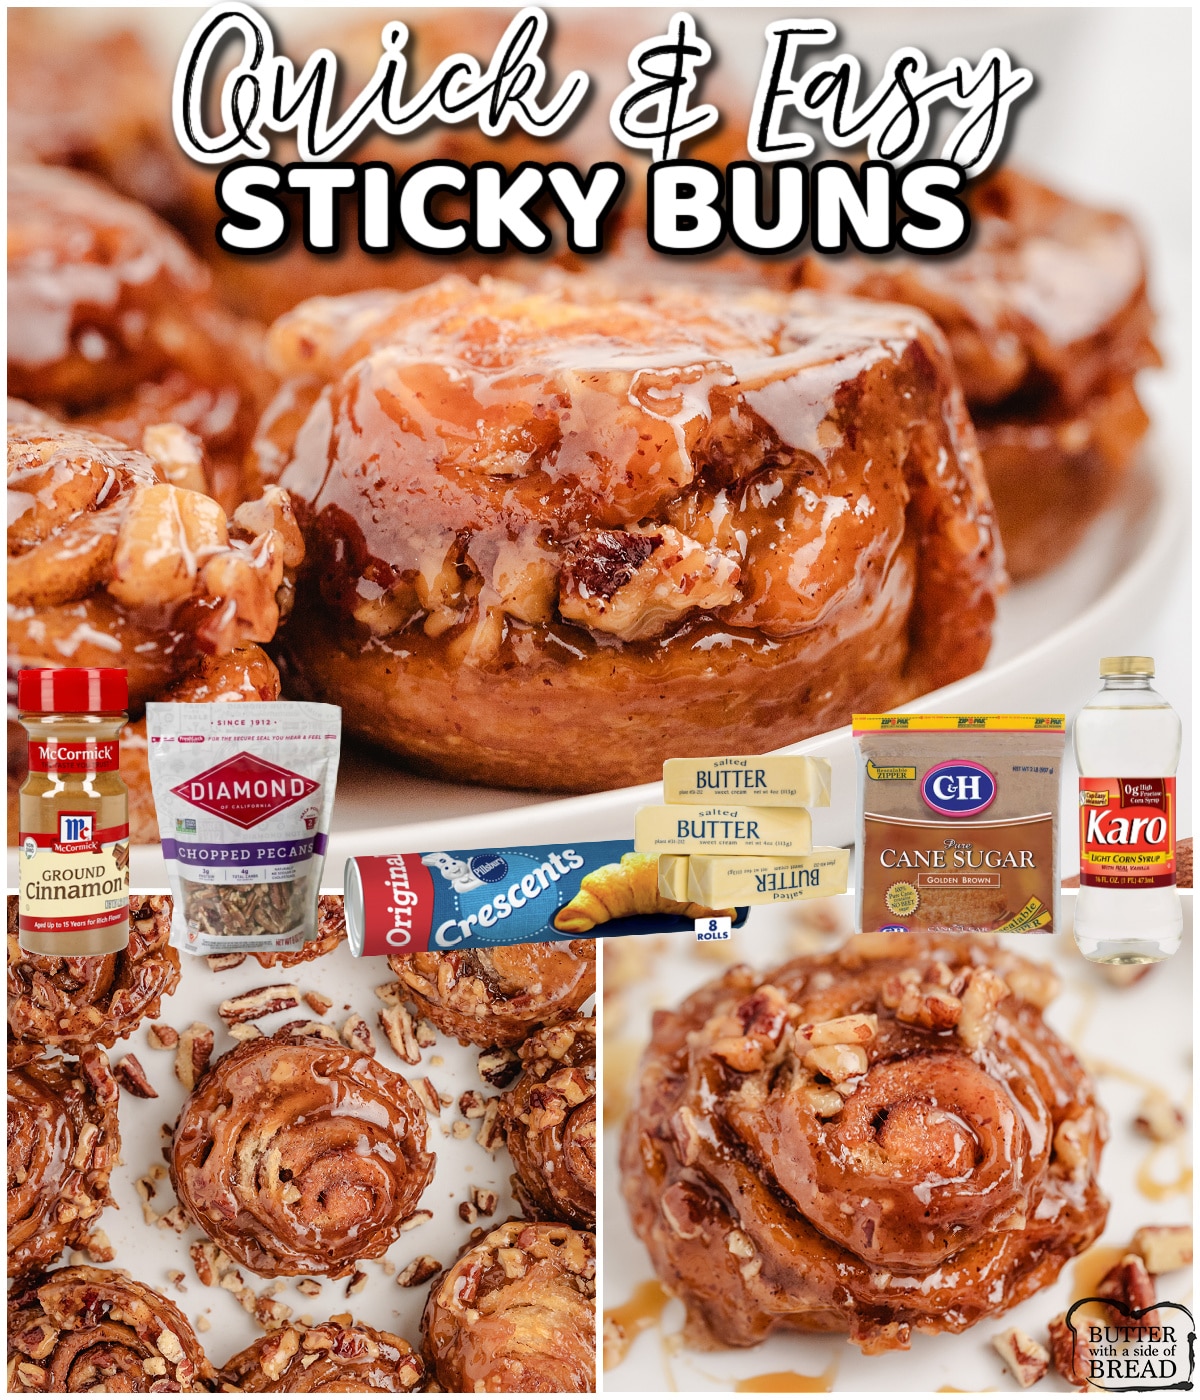 Quick Sticky Buns are a fantastic take on a popular breakfast treat that starts with refrigerated crescent dough! These pecan sticky buns are super easy to make & taste amazing!